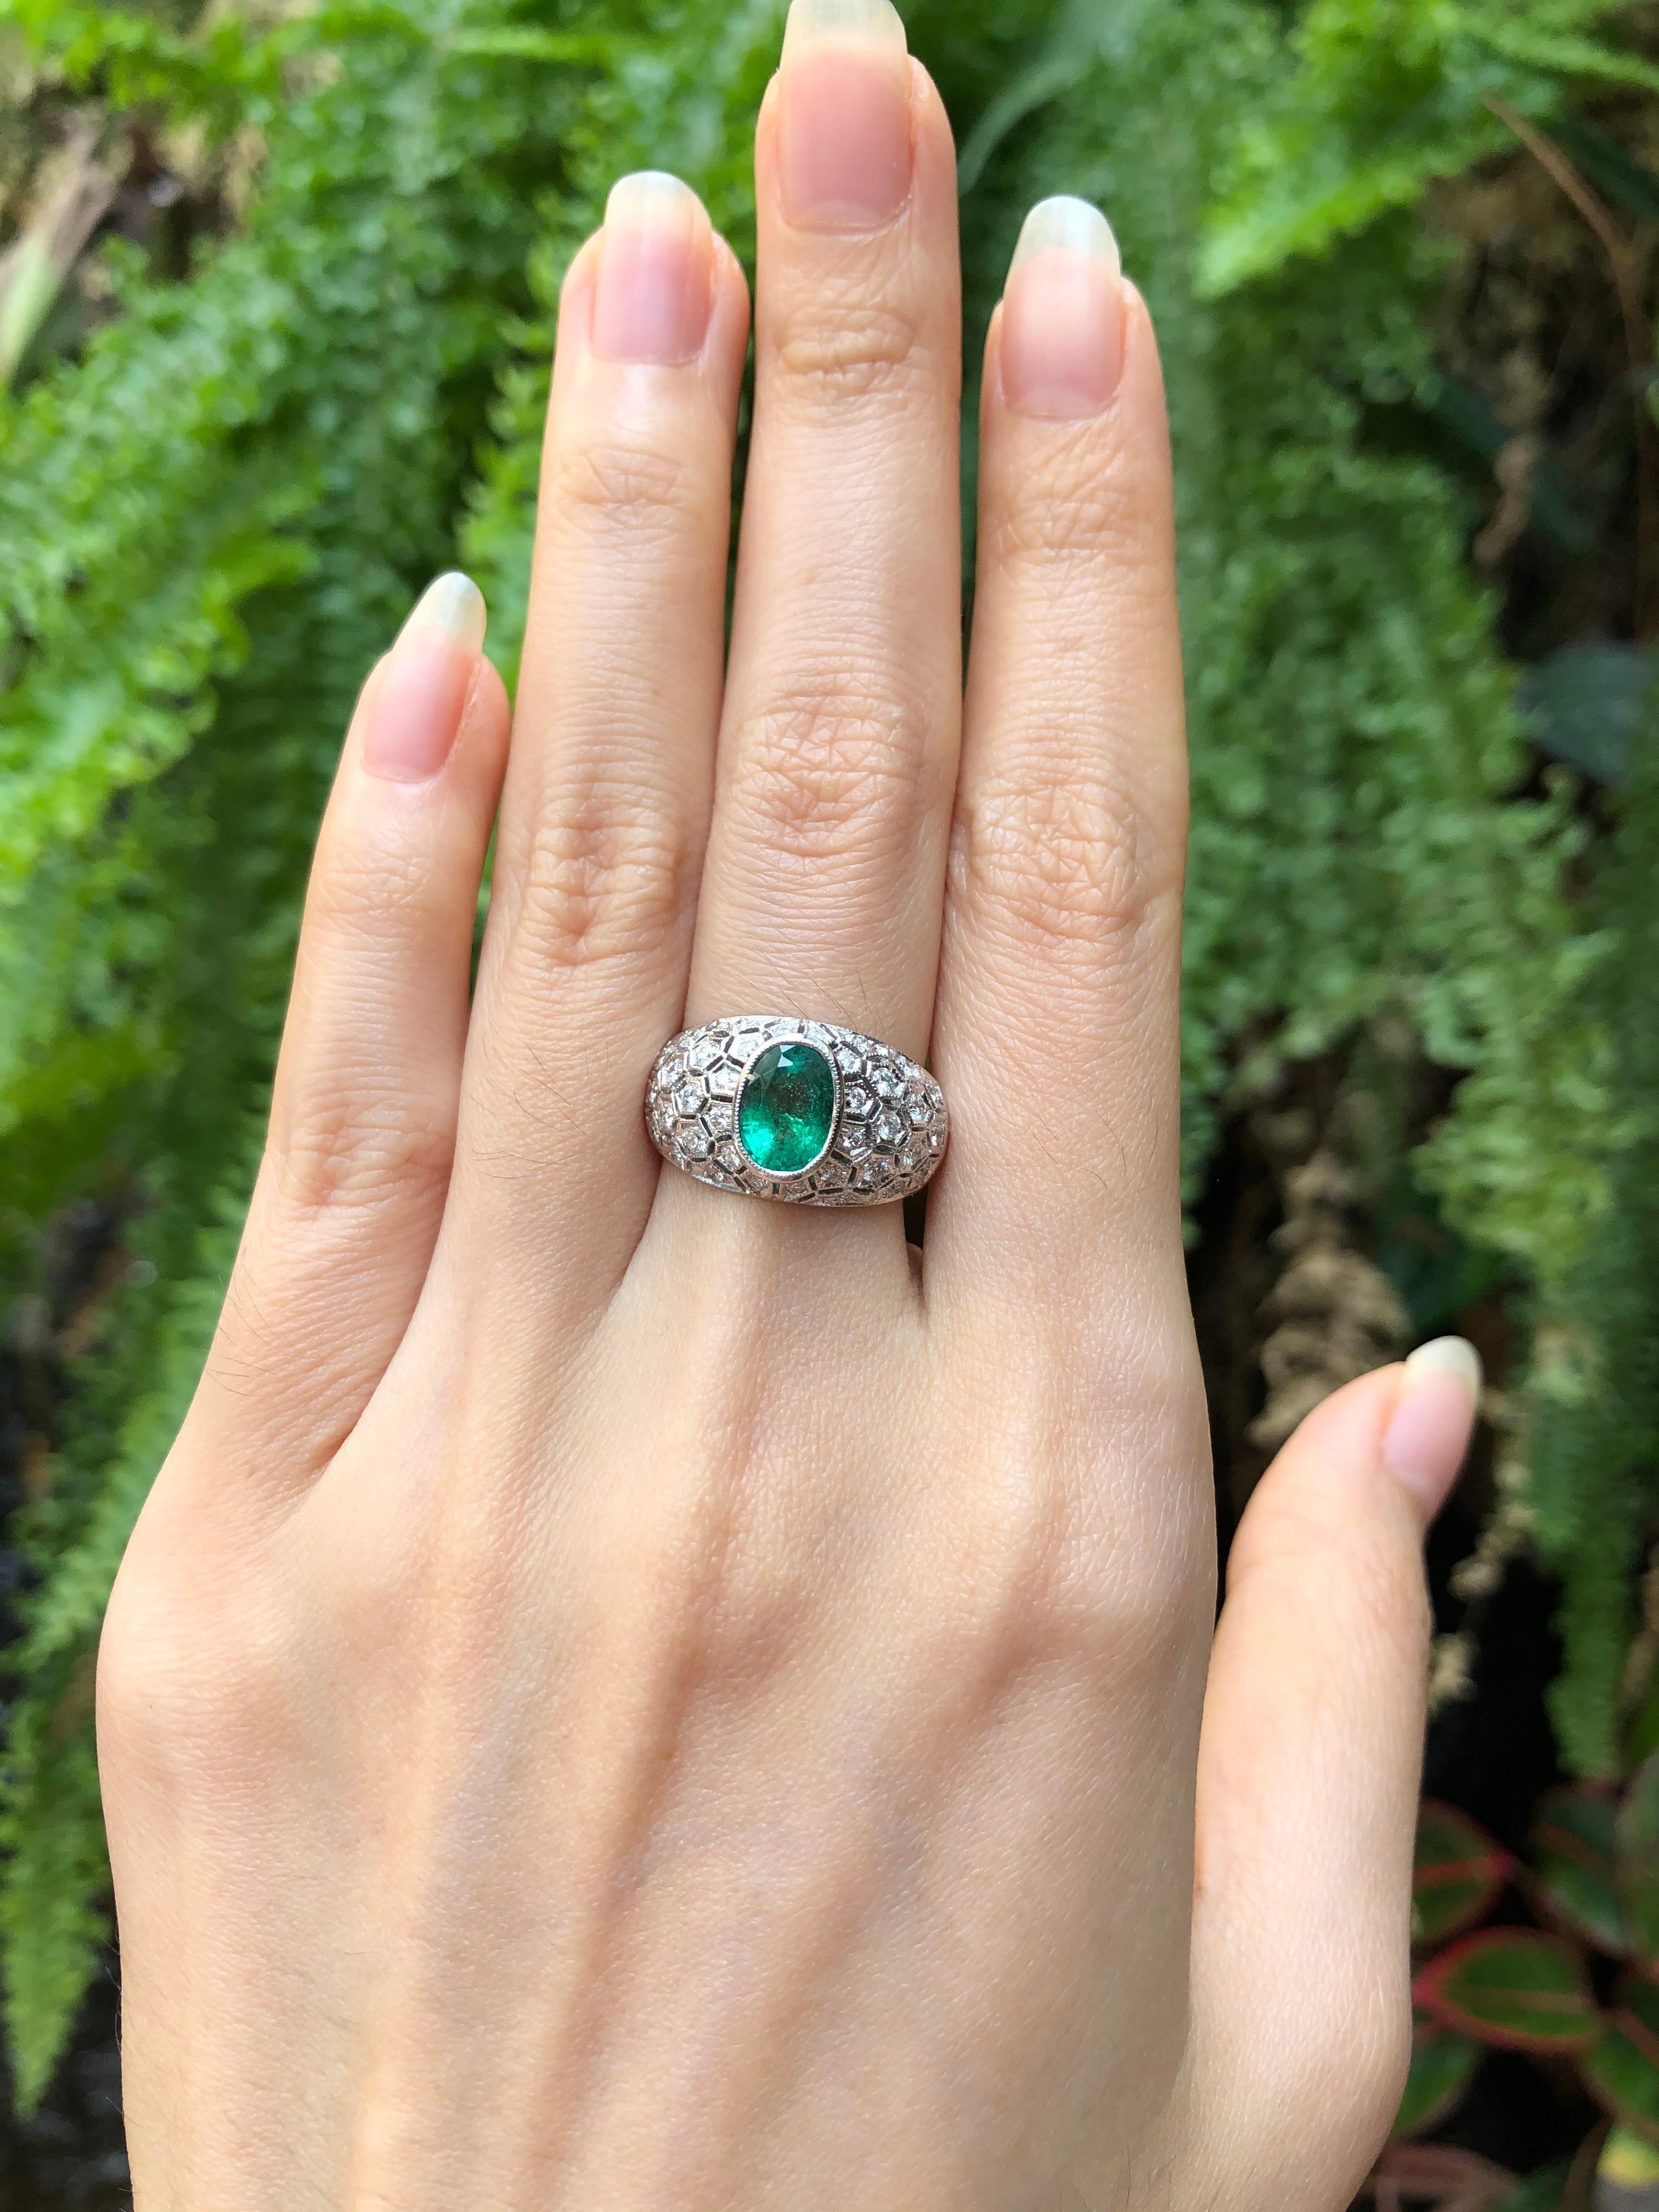 Emerald 1.19 carats with Diamond 0.51 carat Ring set in 18 Karat White Gold Settings

Width:  0.6 cm 
Length: 0.8 cm
Ring Size: 52
Total Weight: 7.52 grams

